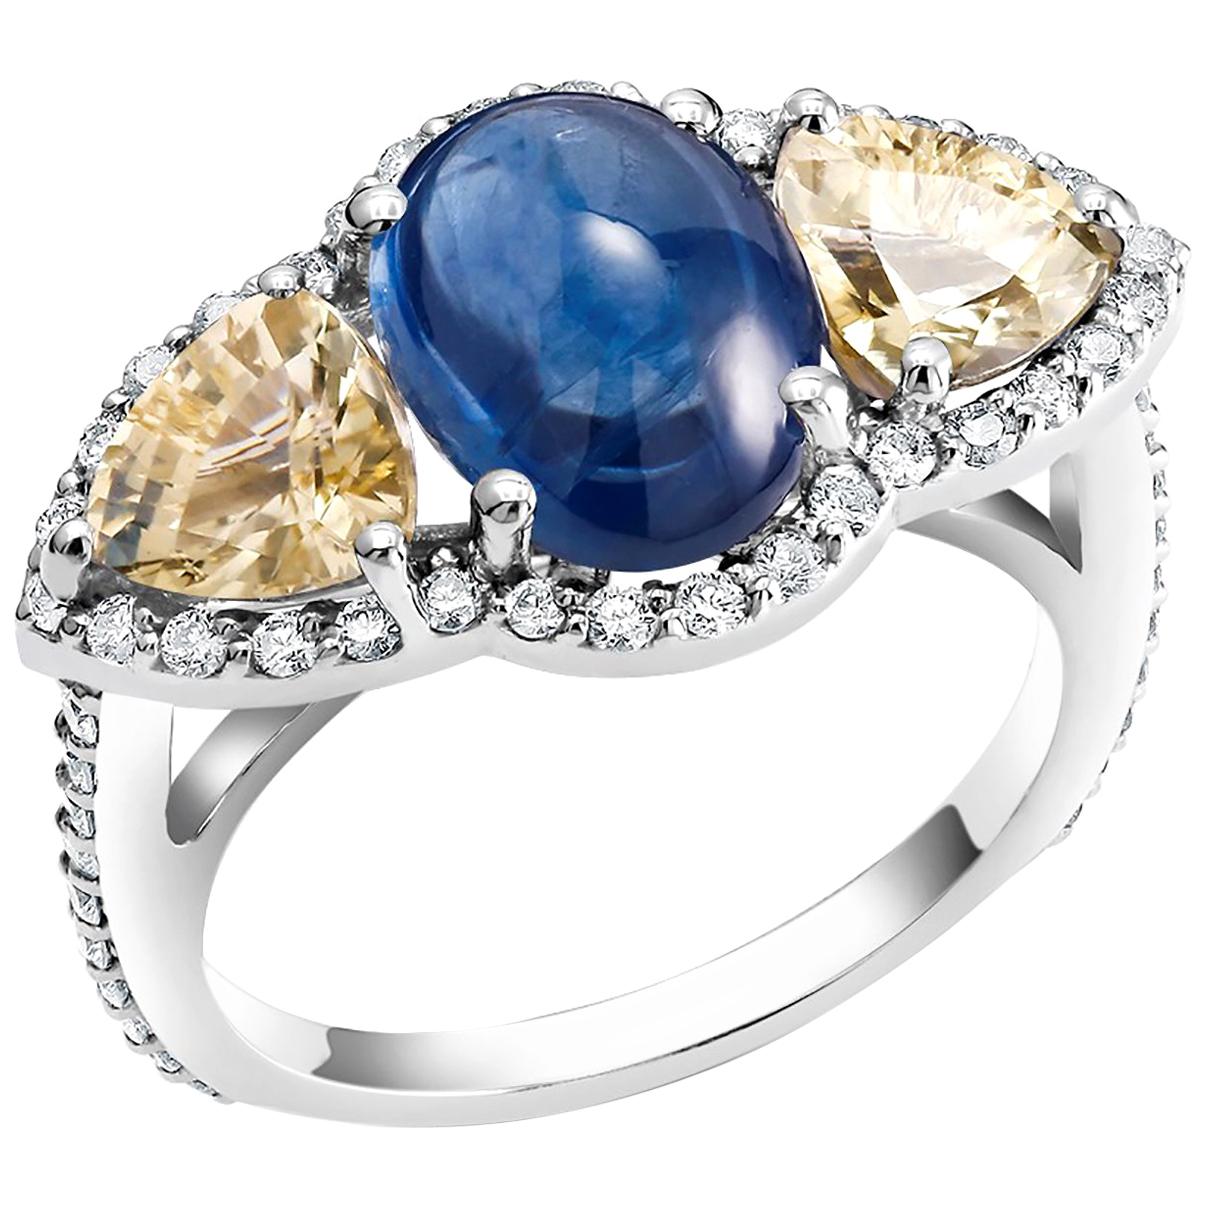 Eighteen karats white gold cocktail ring
Cabochon sapphire weighing 4.07 carat 
Two triangle yellow sapphires weighing 1.90 carat
Surrounded by pave-set diamonds weighing 0.80 carat
Diamond quality G VS
New ring 
Ring finger size 6 In Stock
The ring